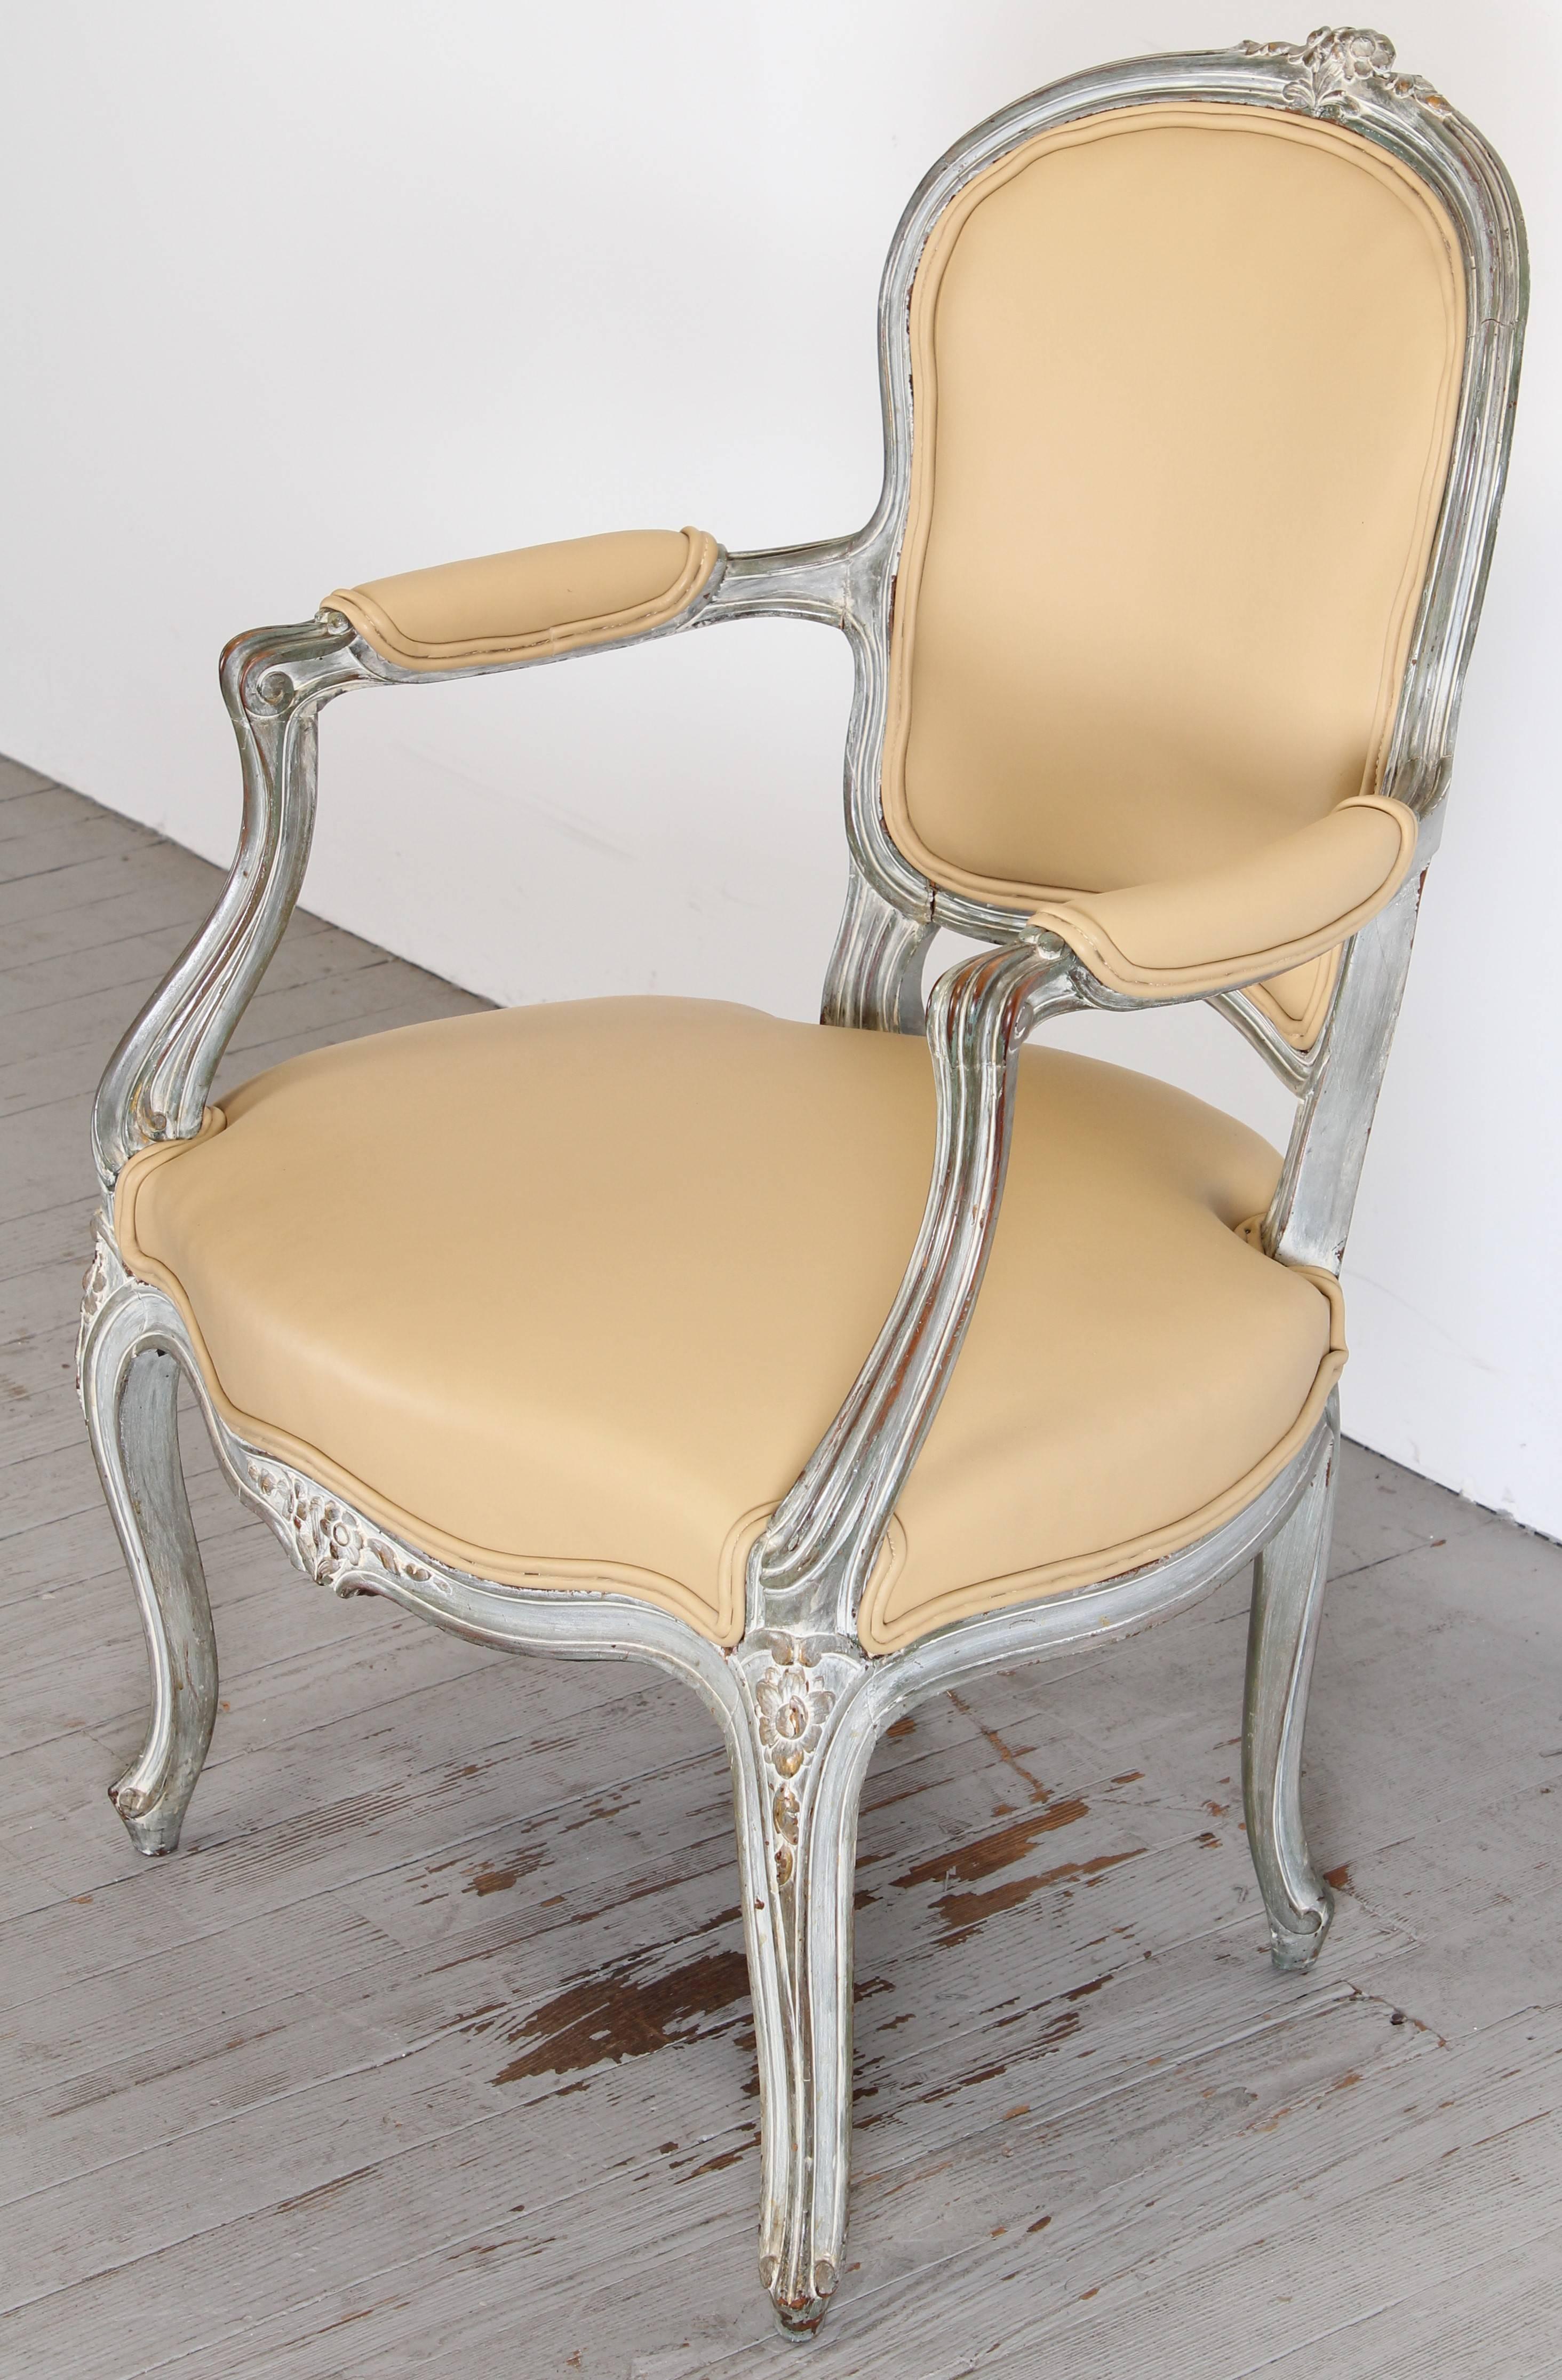 A lovely painted French Louis XV painted beech wood Fauteuil or Armchair. Having a green tinted cream and gray painted finish. The chair is sturdy; the gap in lower left backrest is solid and has no movement. New upholstery is recommended.